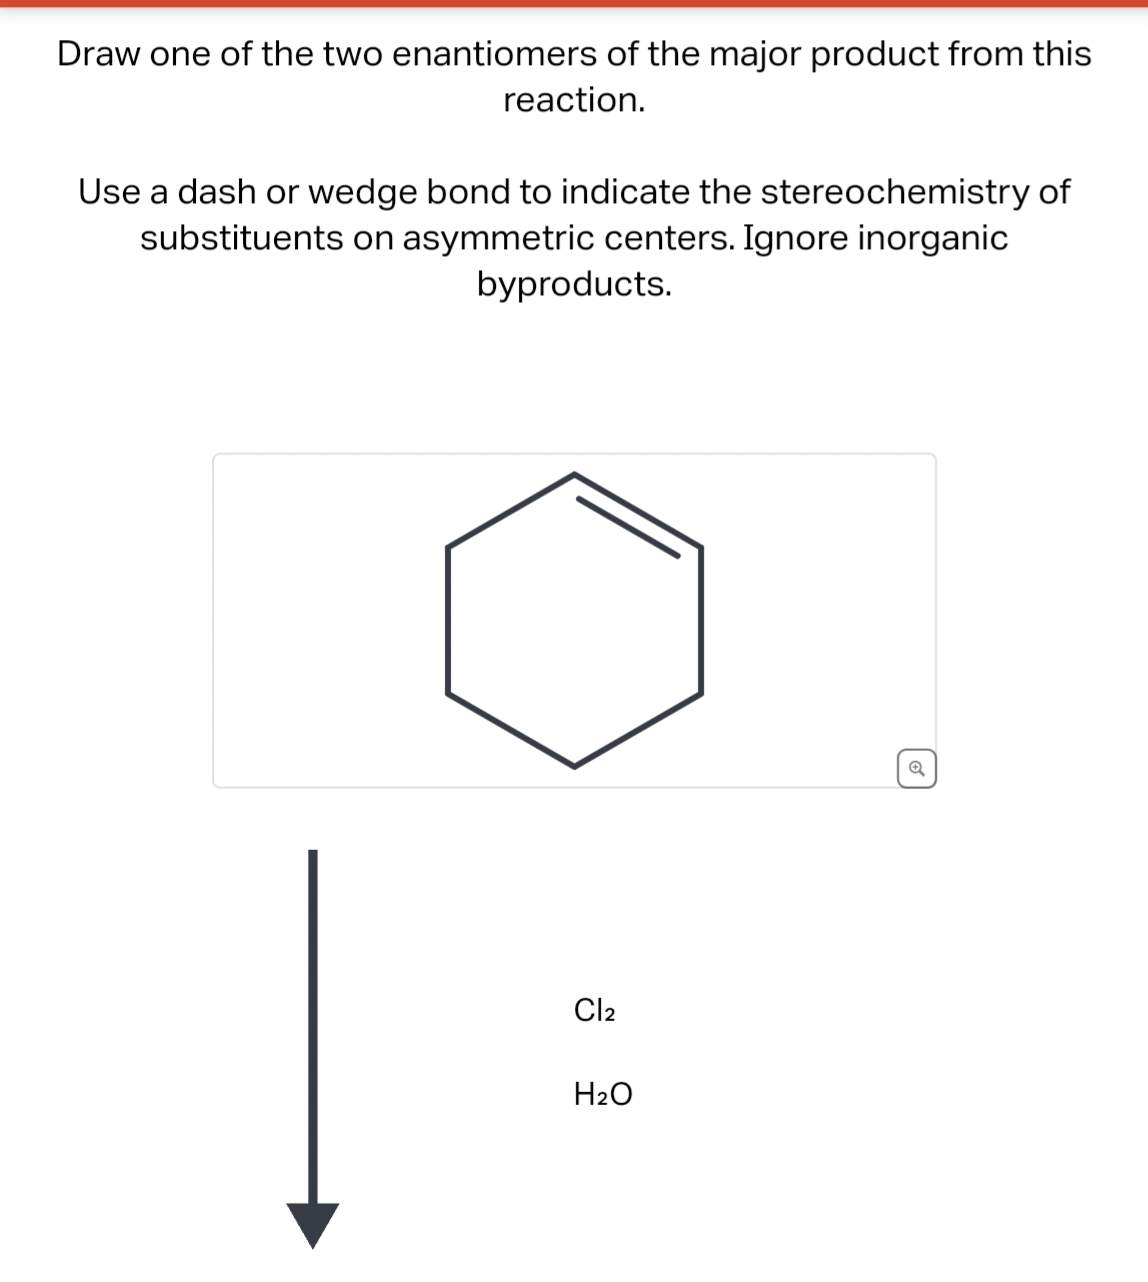 Draw one of the two enantiomers of the major product from this
reaction.
Use a dash or wedge bond to indicate the stereochemistry of
substituents on asymmetric centers. Ignore inorganic
byproducts.
Cl₂
H₂O
Q